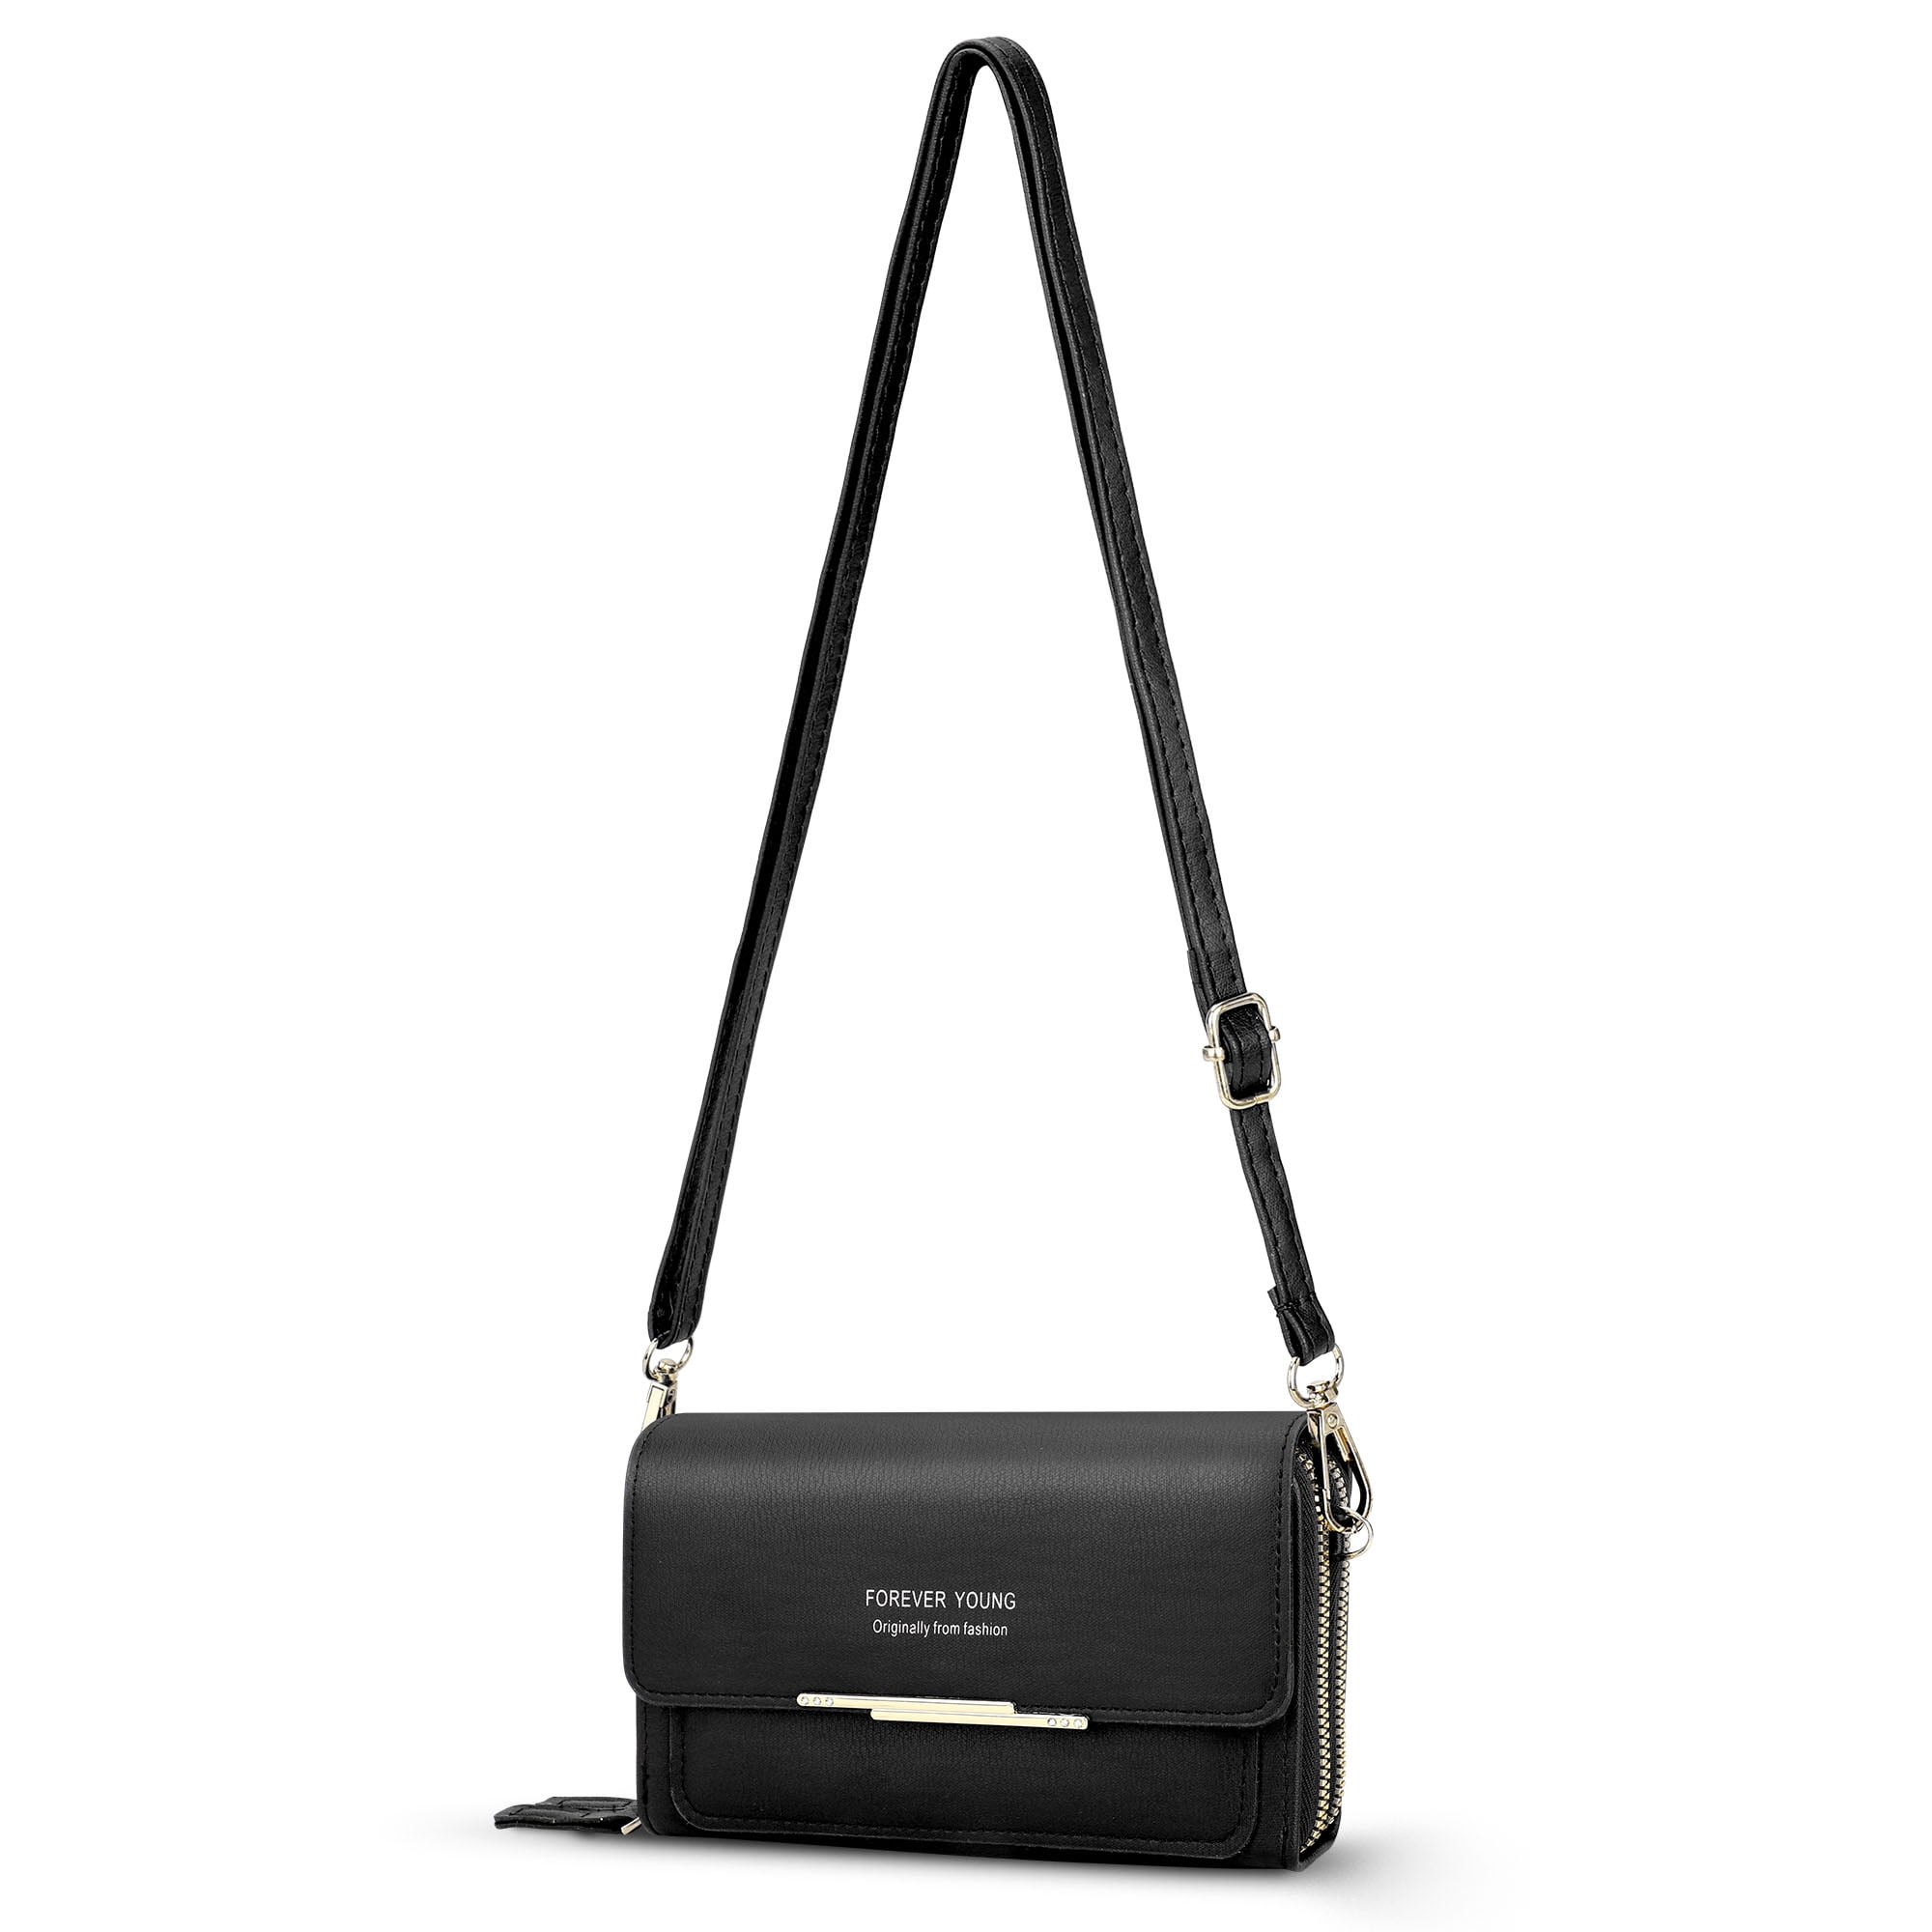 Fashionable And Simple Black Crossbody Bag For Women, Suitable For Daily  Commute, School And Travel, Convenient Mini Bag For Phone And Wallet